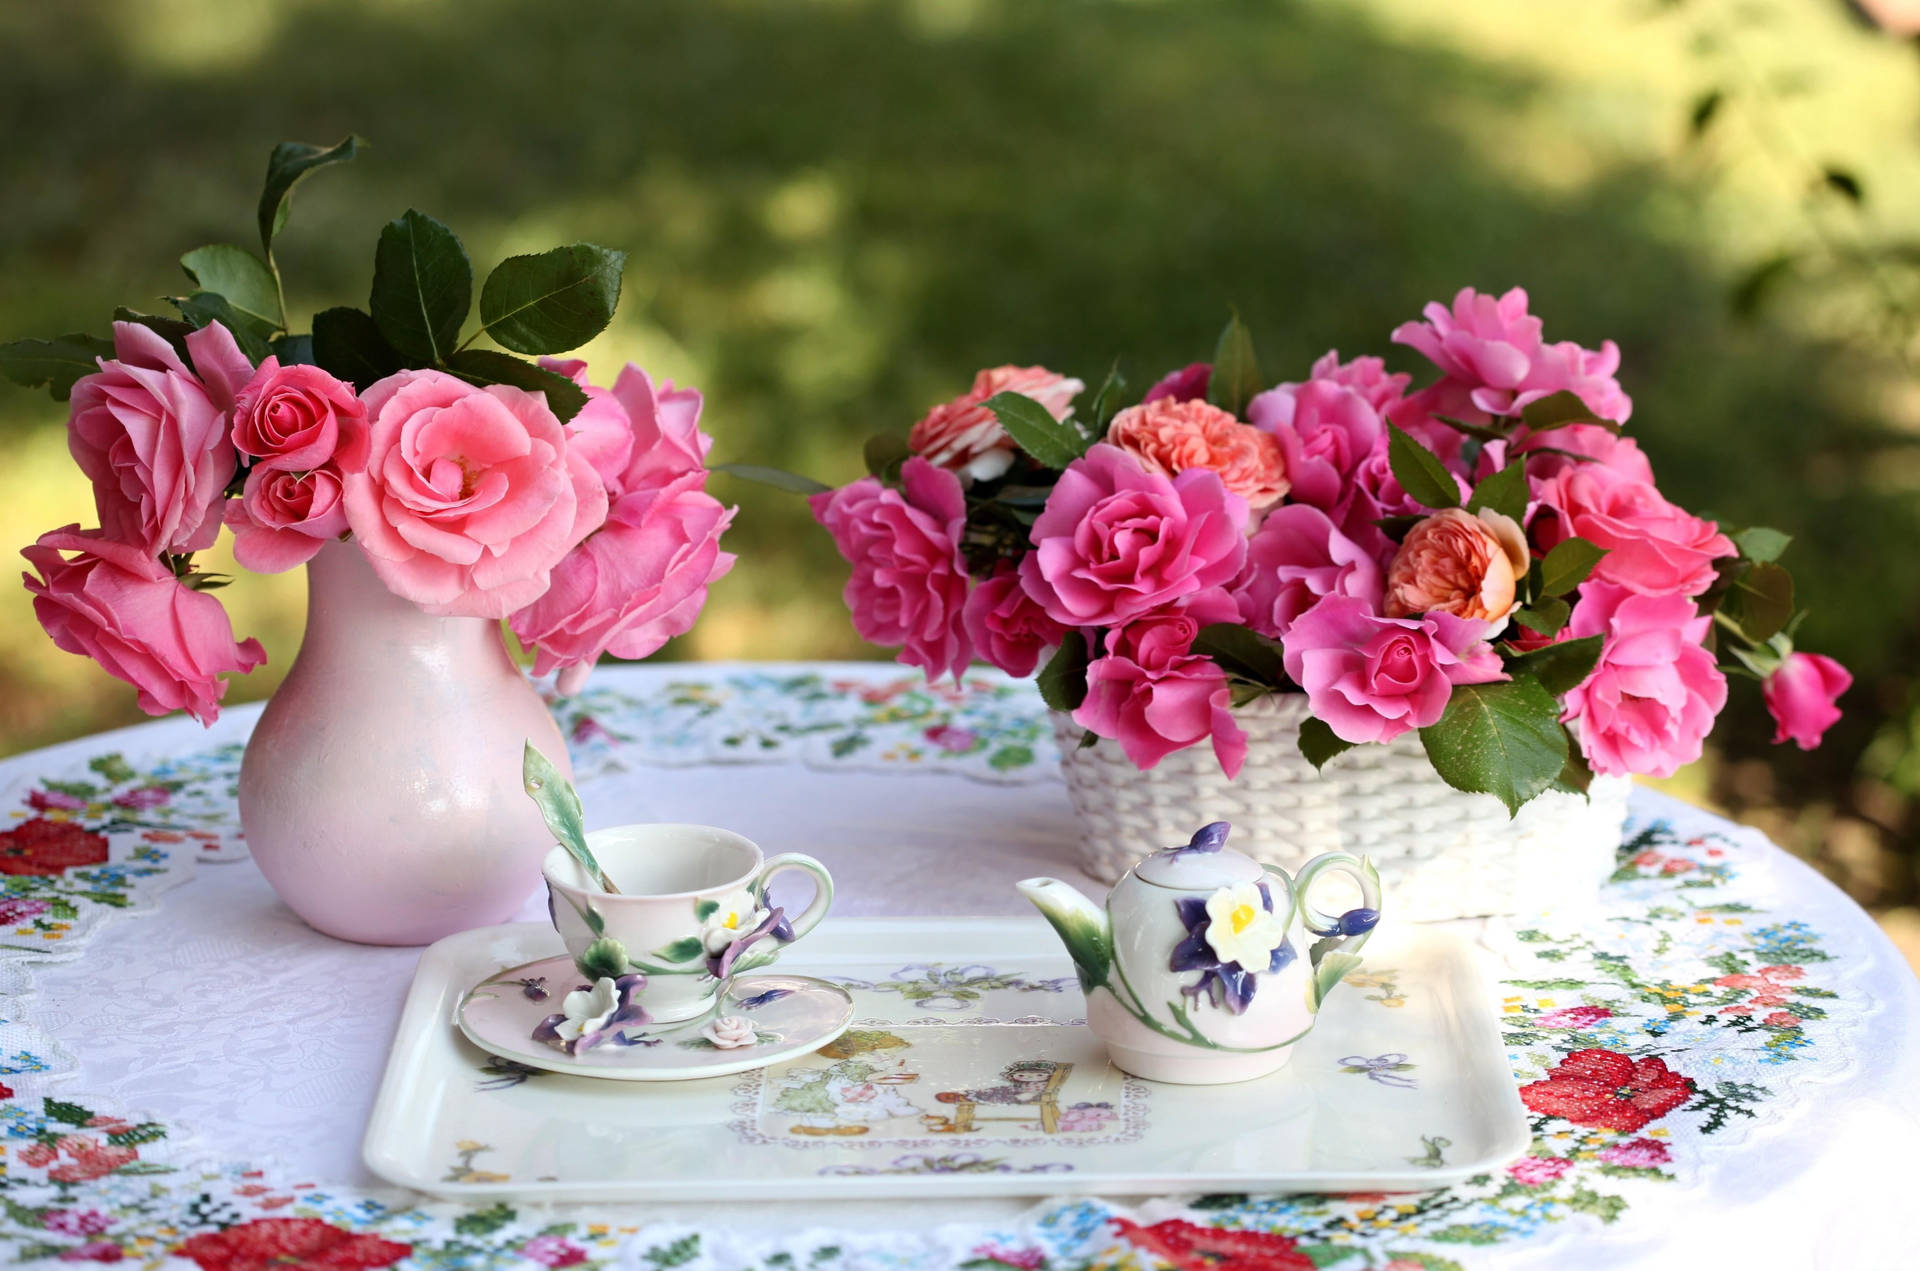 Pink Roses On A Tea Table Wallpaper